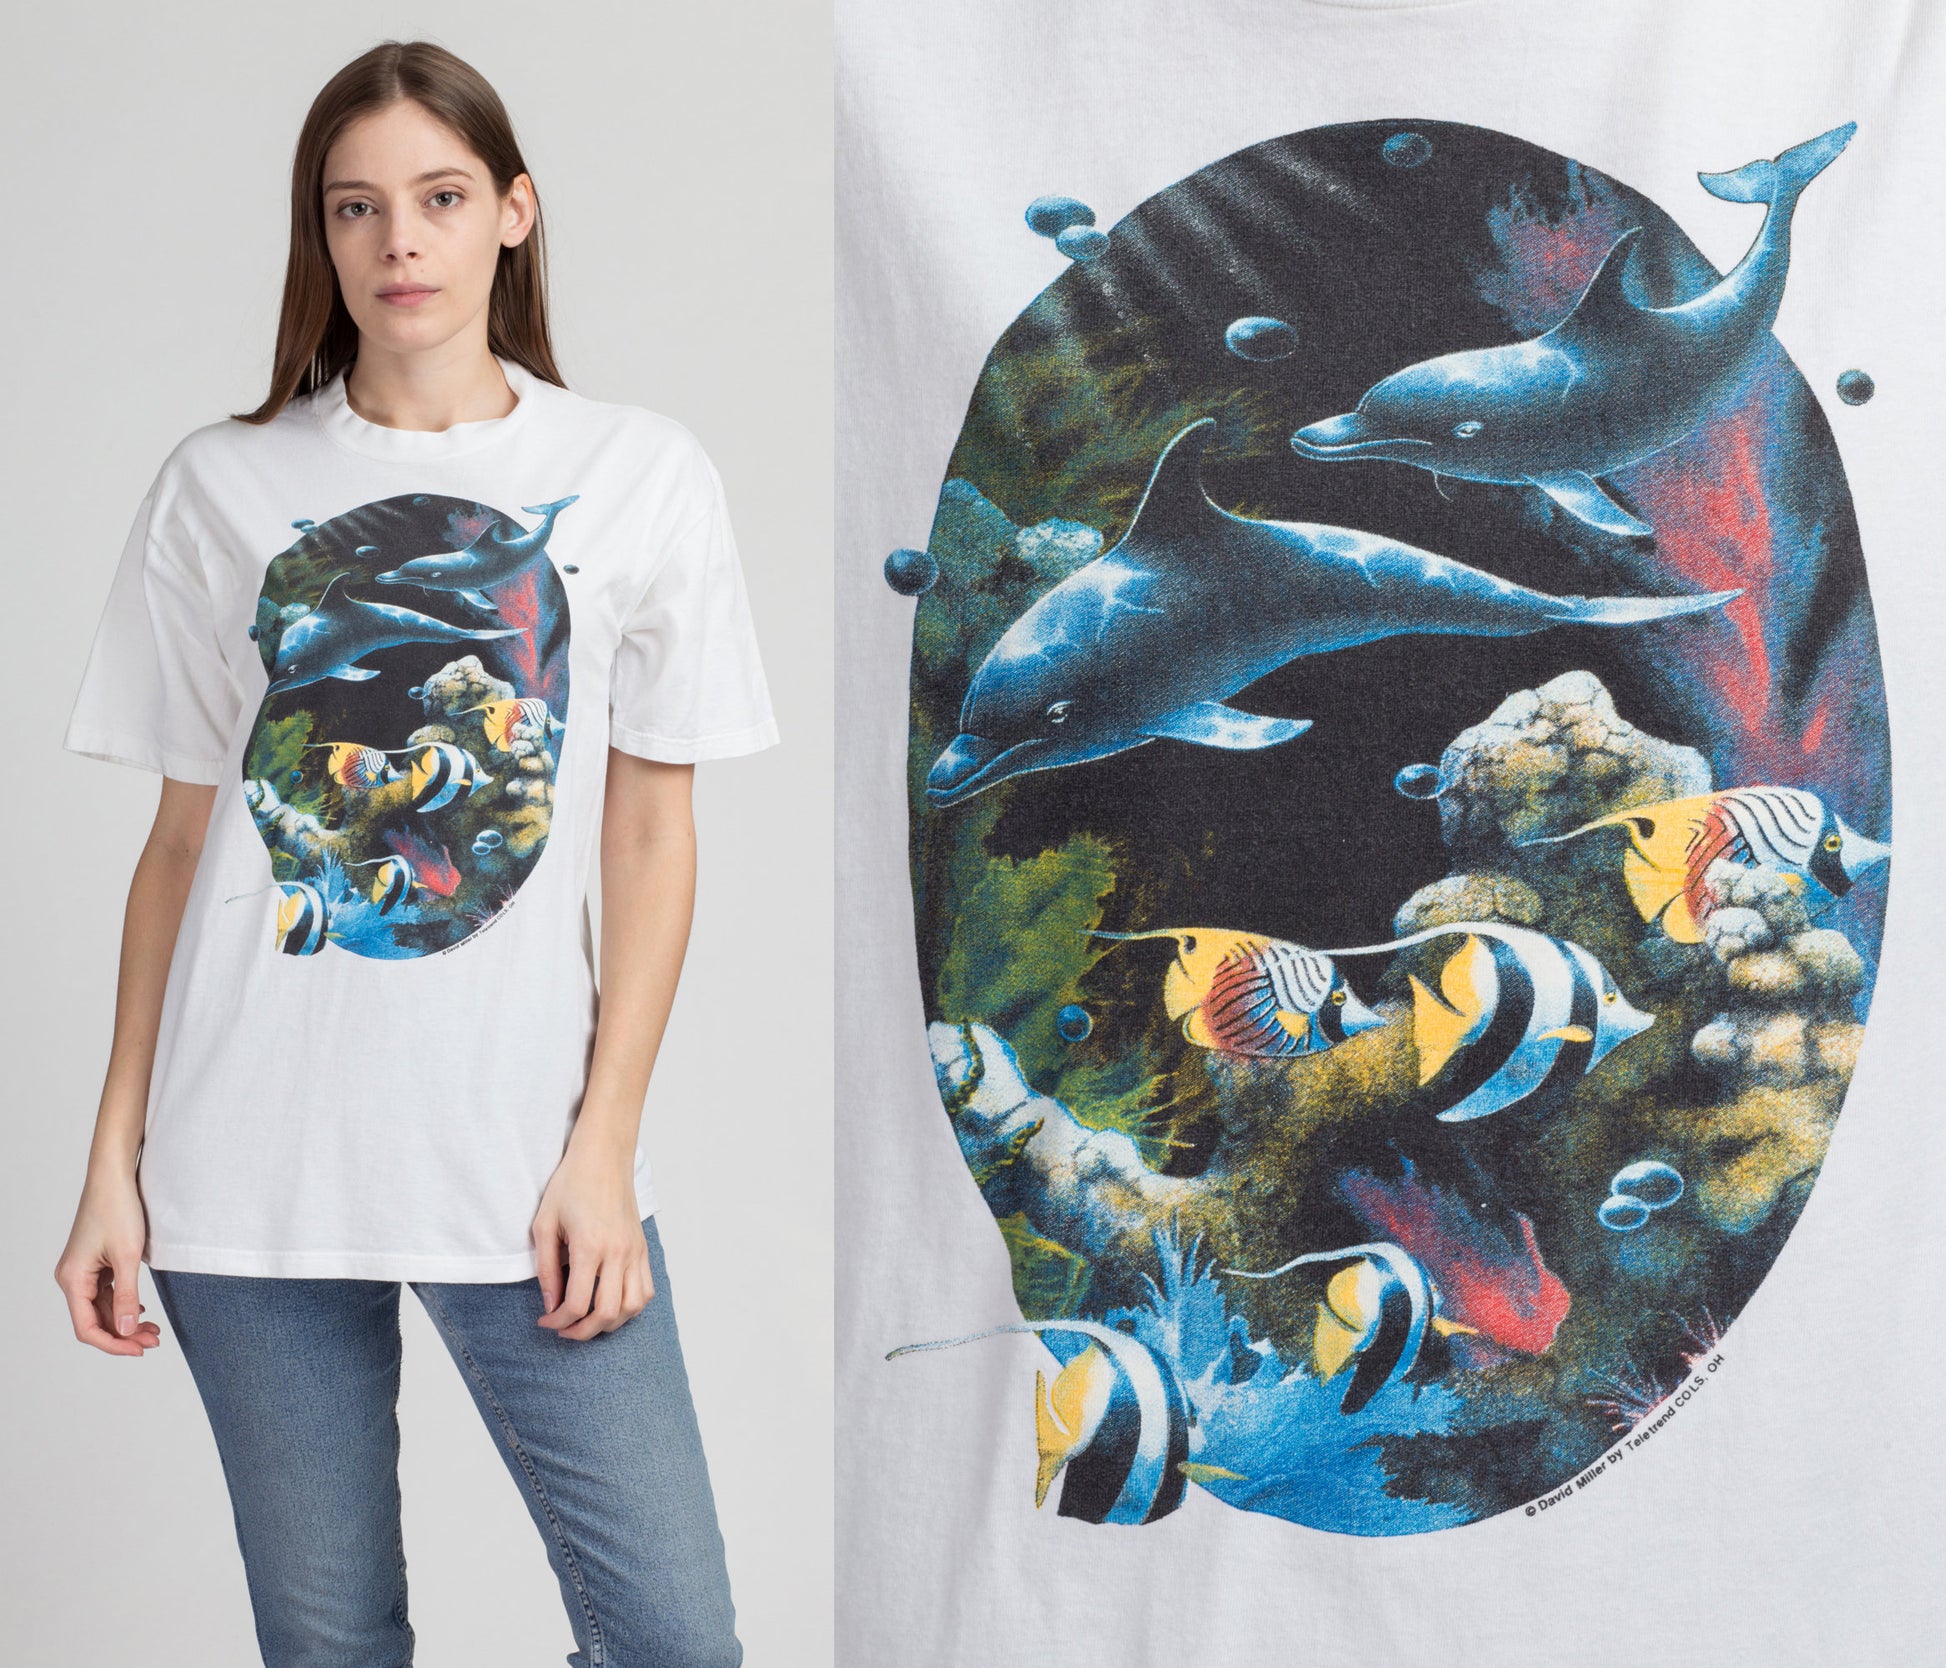 90s Dolphin Graphic Tee - Medium to Large | Vintage White Cotton Fish T Shirt